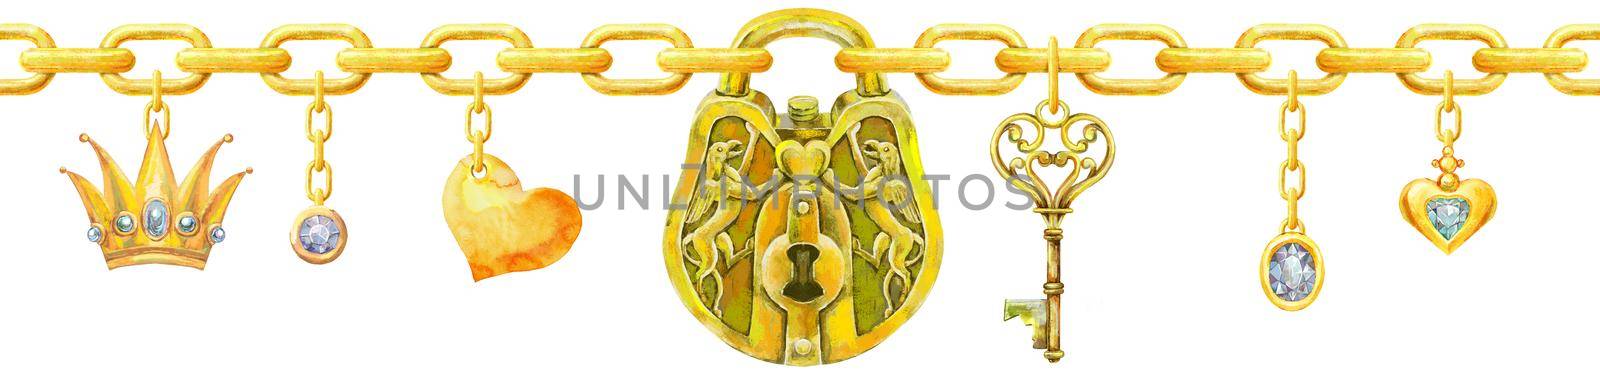 Seamless border padlock and key on a chain. Watercolor illustration on a white background